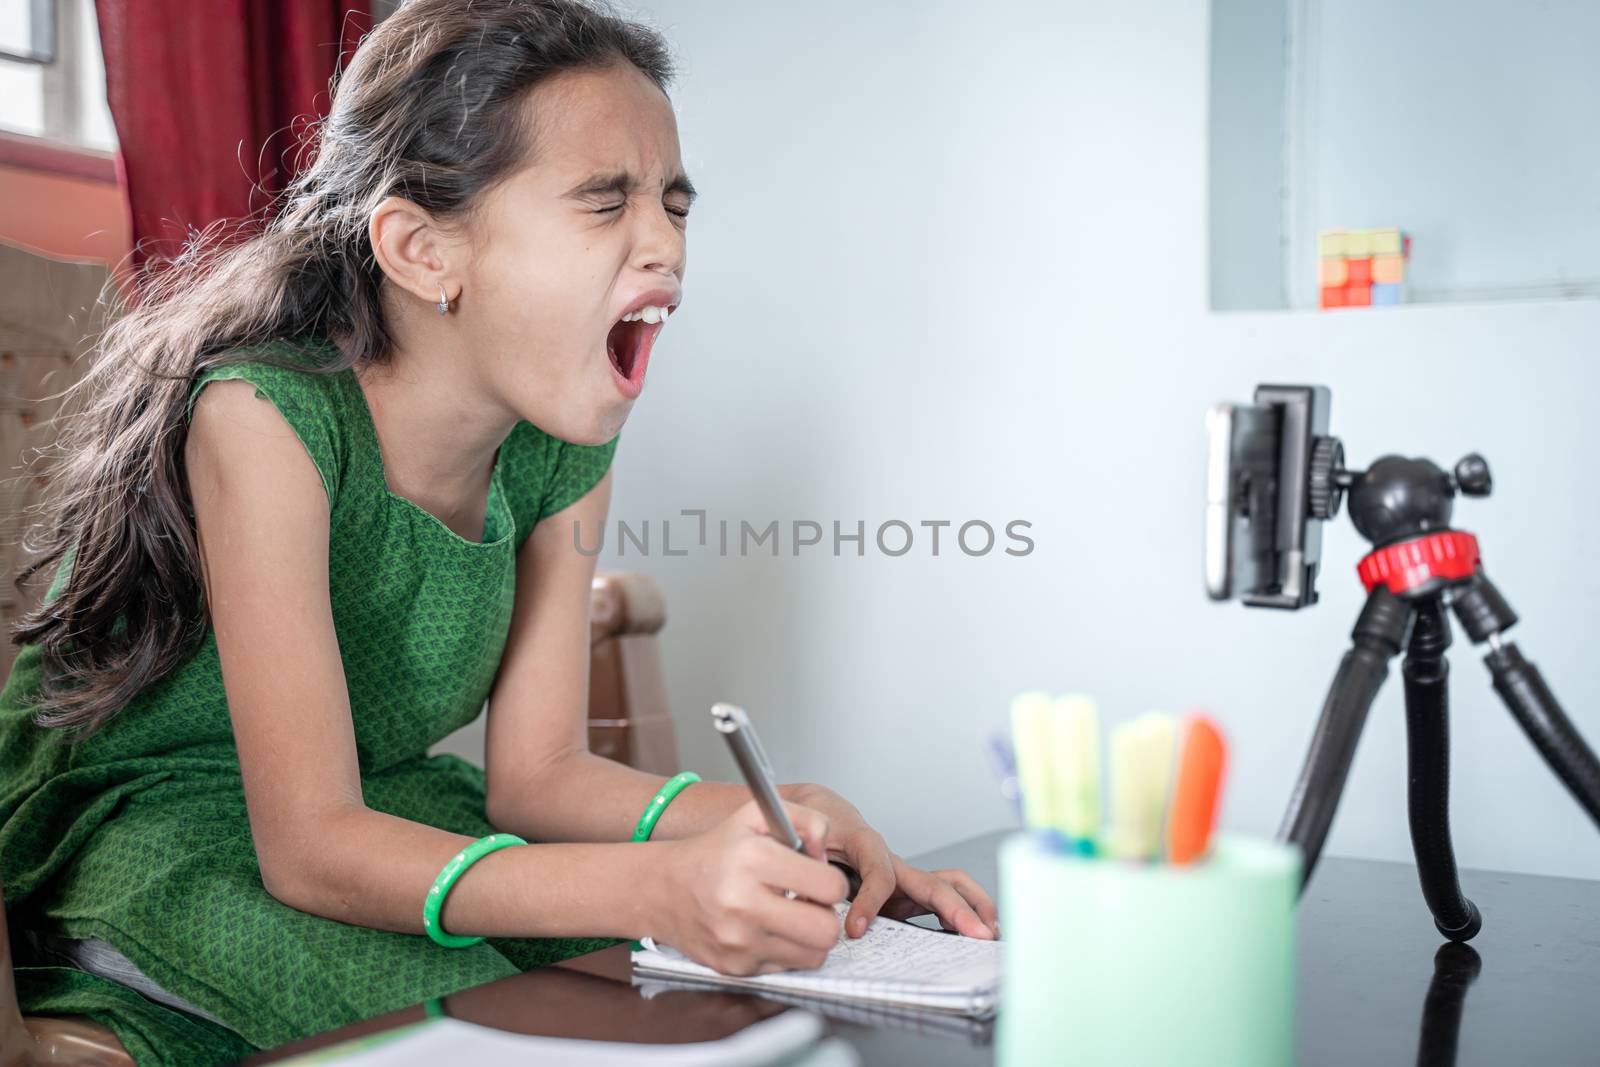 Girl shouting, screaming in front of mobilephone during e-learning or online class at home - concept of problem, stress, anxiety for students or kids in distance learning. by lakshmiprasad.maski@gmai.com